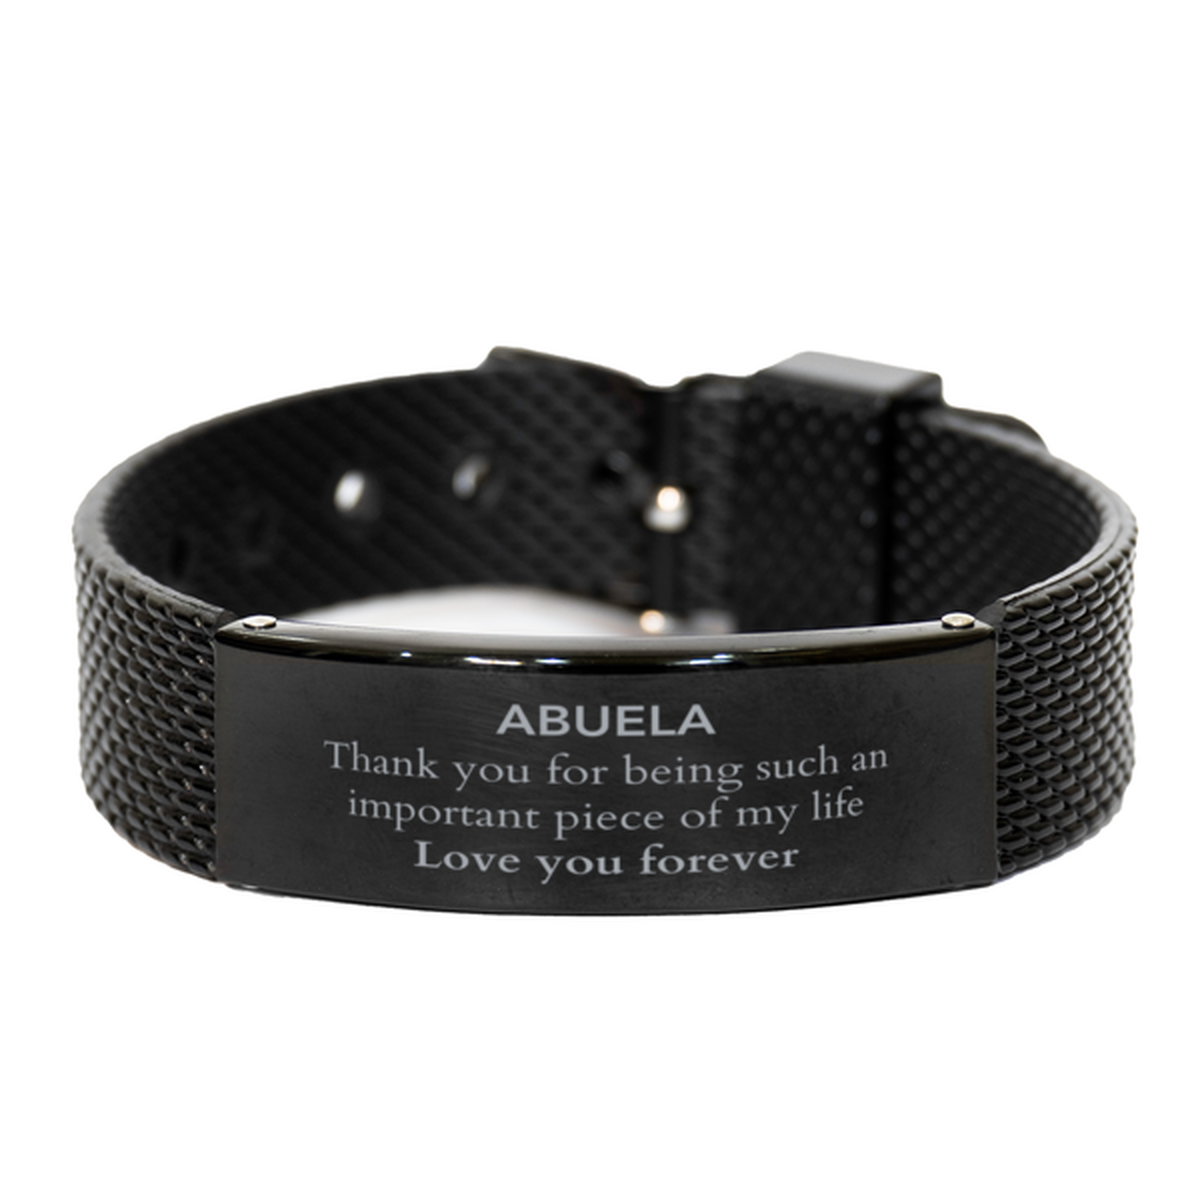 Appropriate Abuela Black Shark Mesh Bracelet Epic Birthday Gifts for Abuela Thank you for being such an important piece of my life Abuela Christmas Mothers Fathers Day